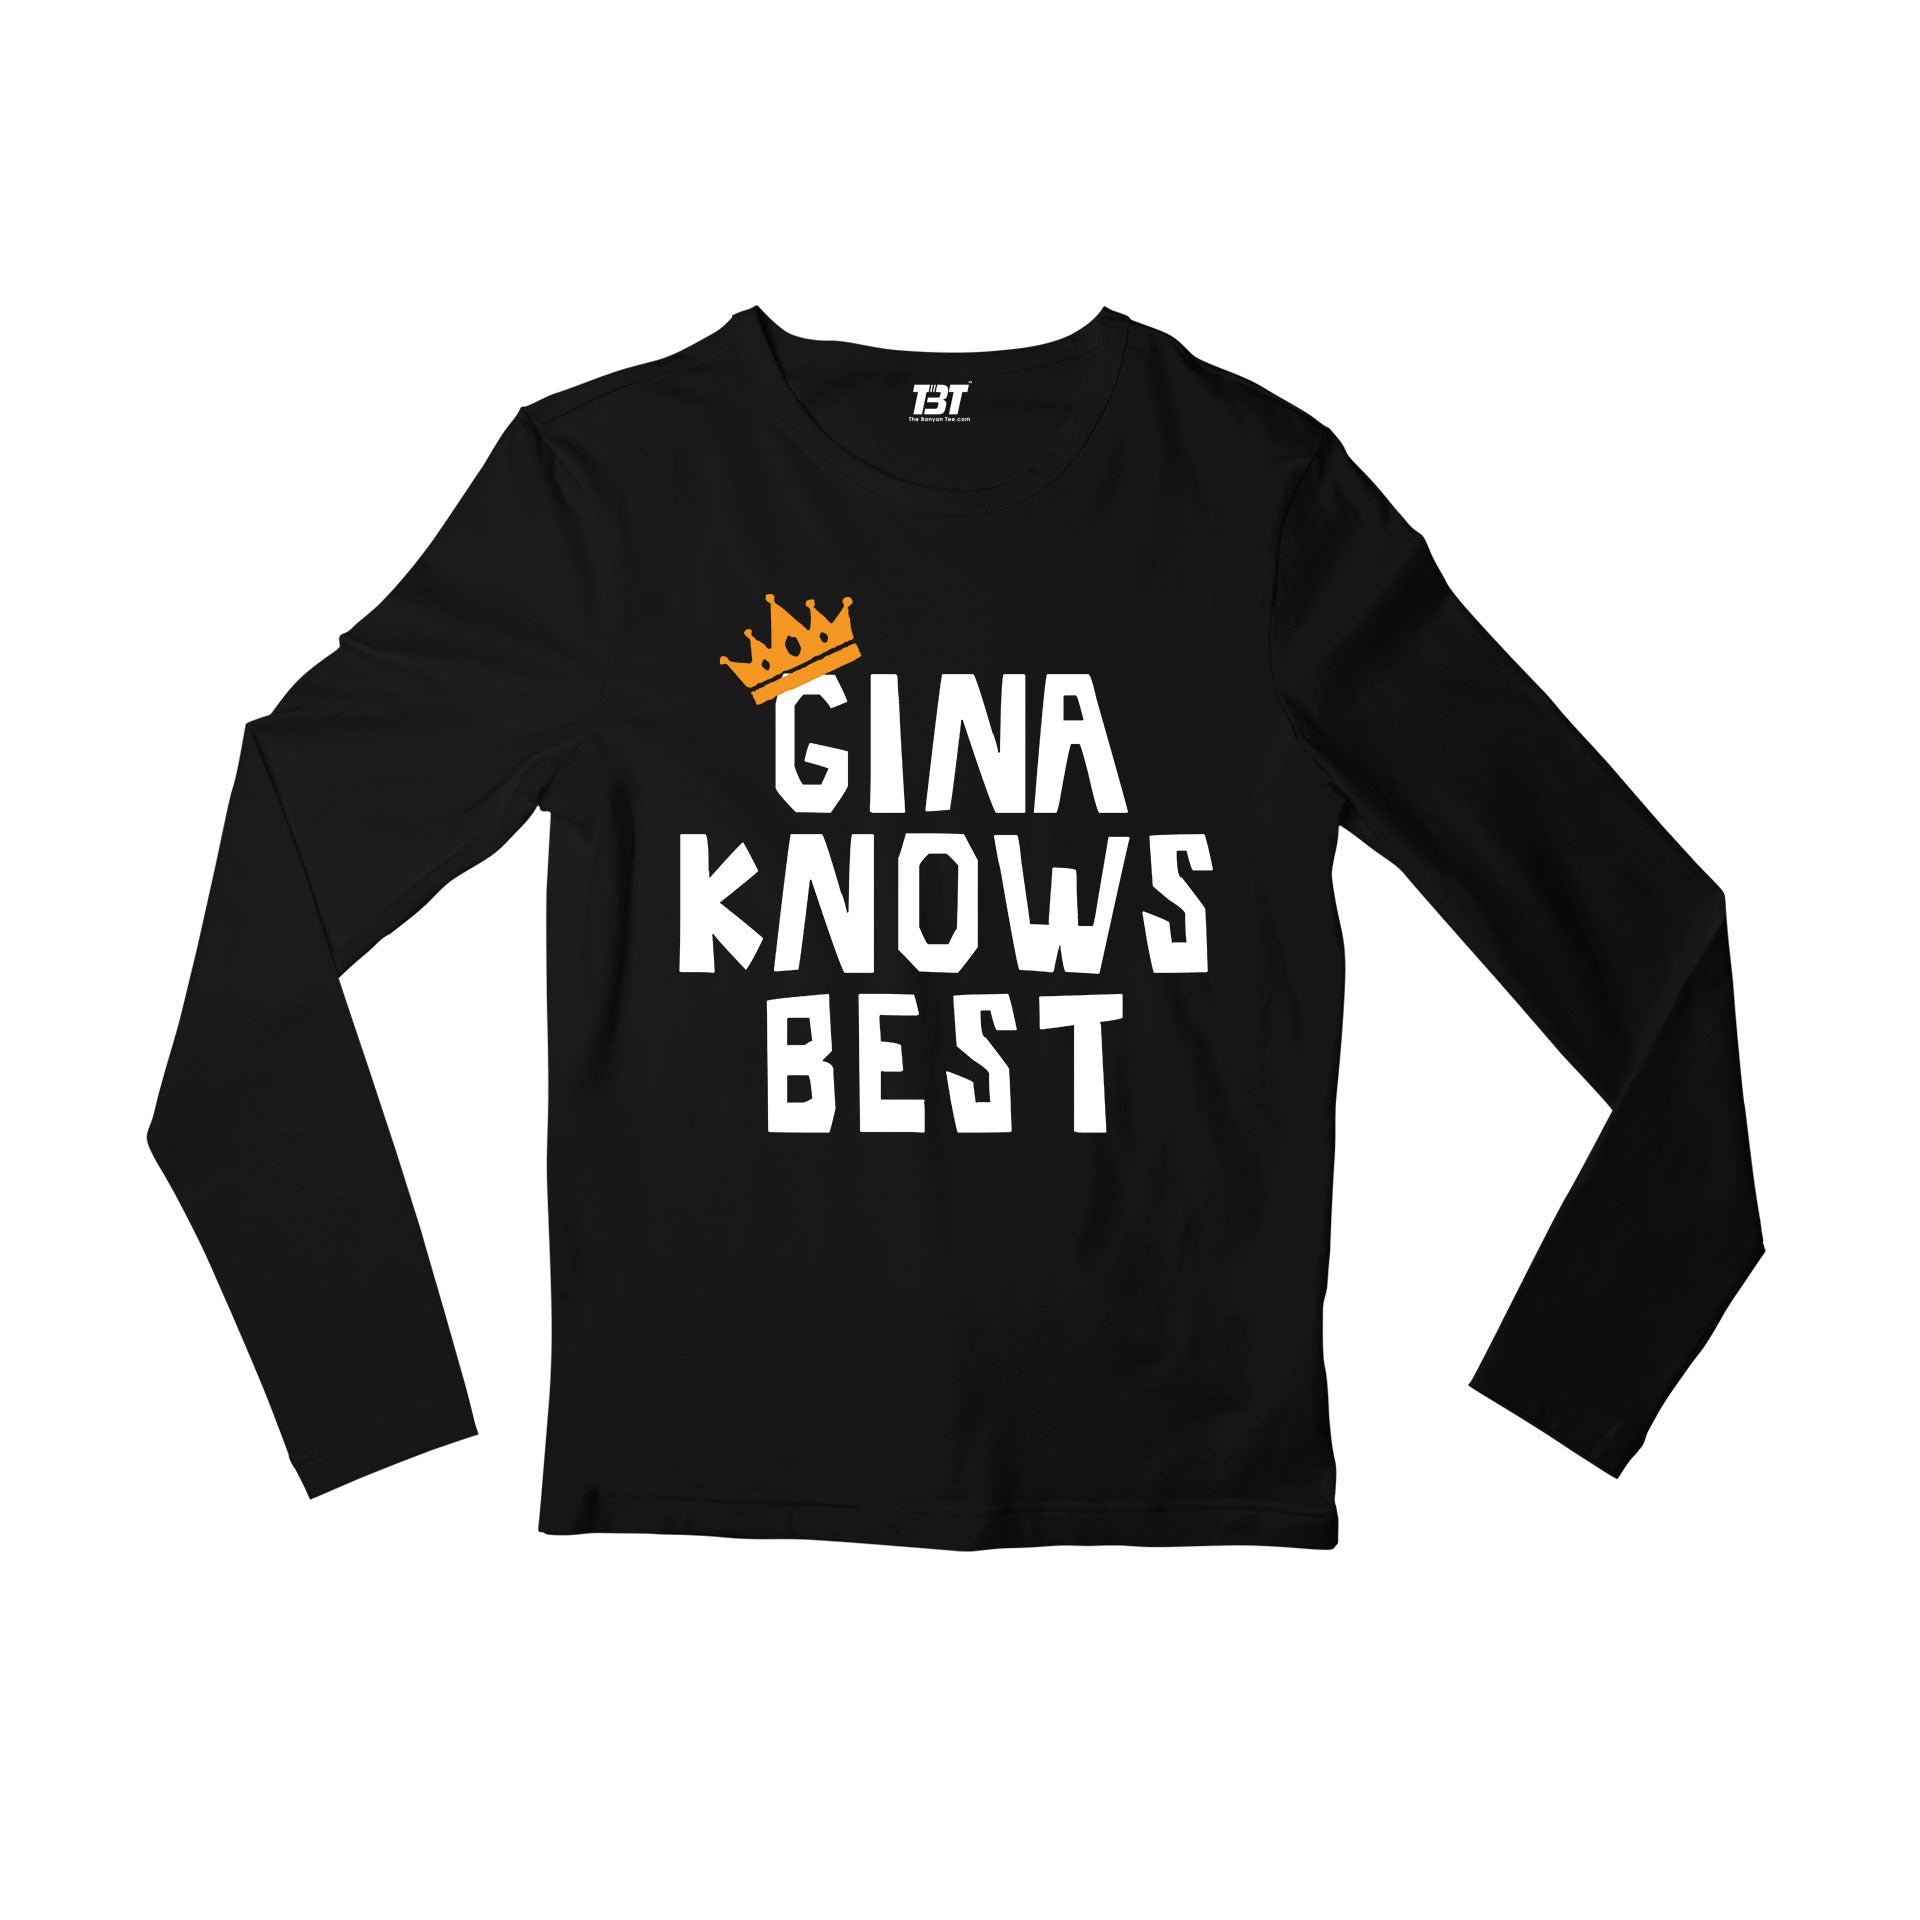 brooklyn nine-nine gina knows best full sleeves long sleeves buy online india the banyan tee tbt men women girls boys unisex black detective jake peralta terry charles boyle gina linetti andy samberg merchandise clothing acceessories